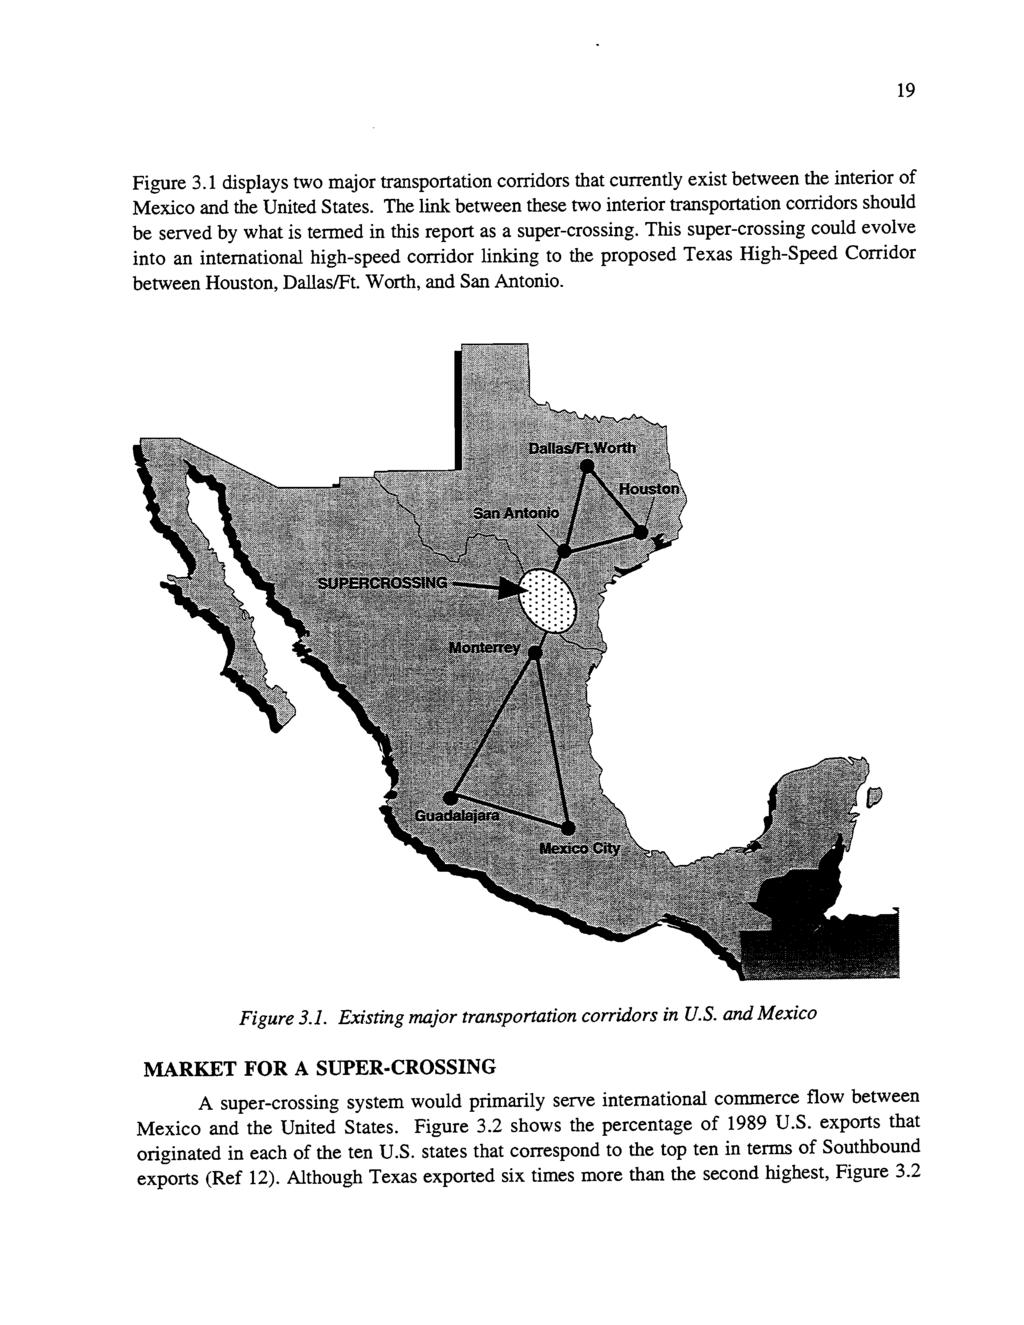 19 Figure 3.1 displays two major transportation corridors that currently exist between the interior of Mexico and the United States.